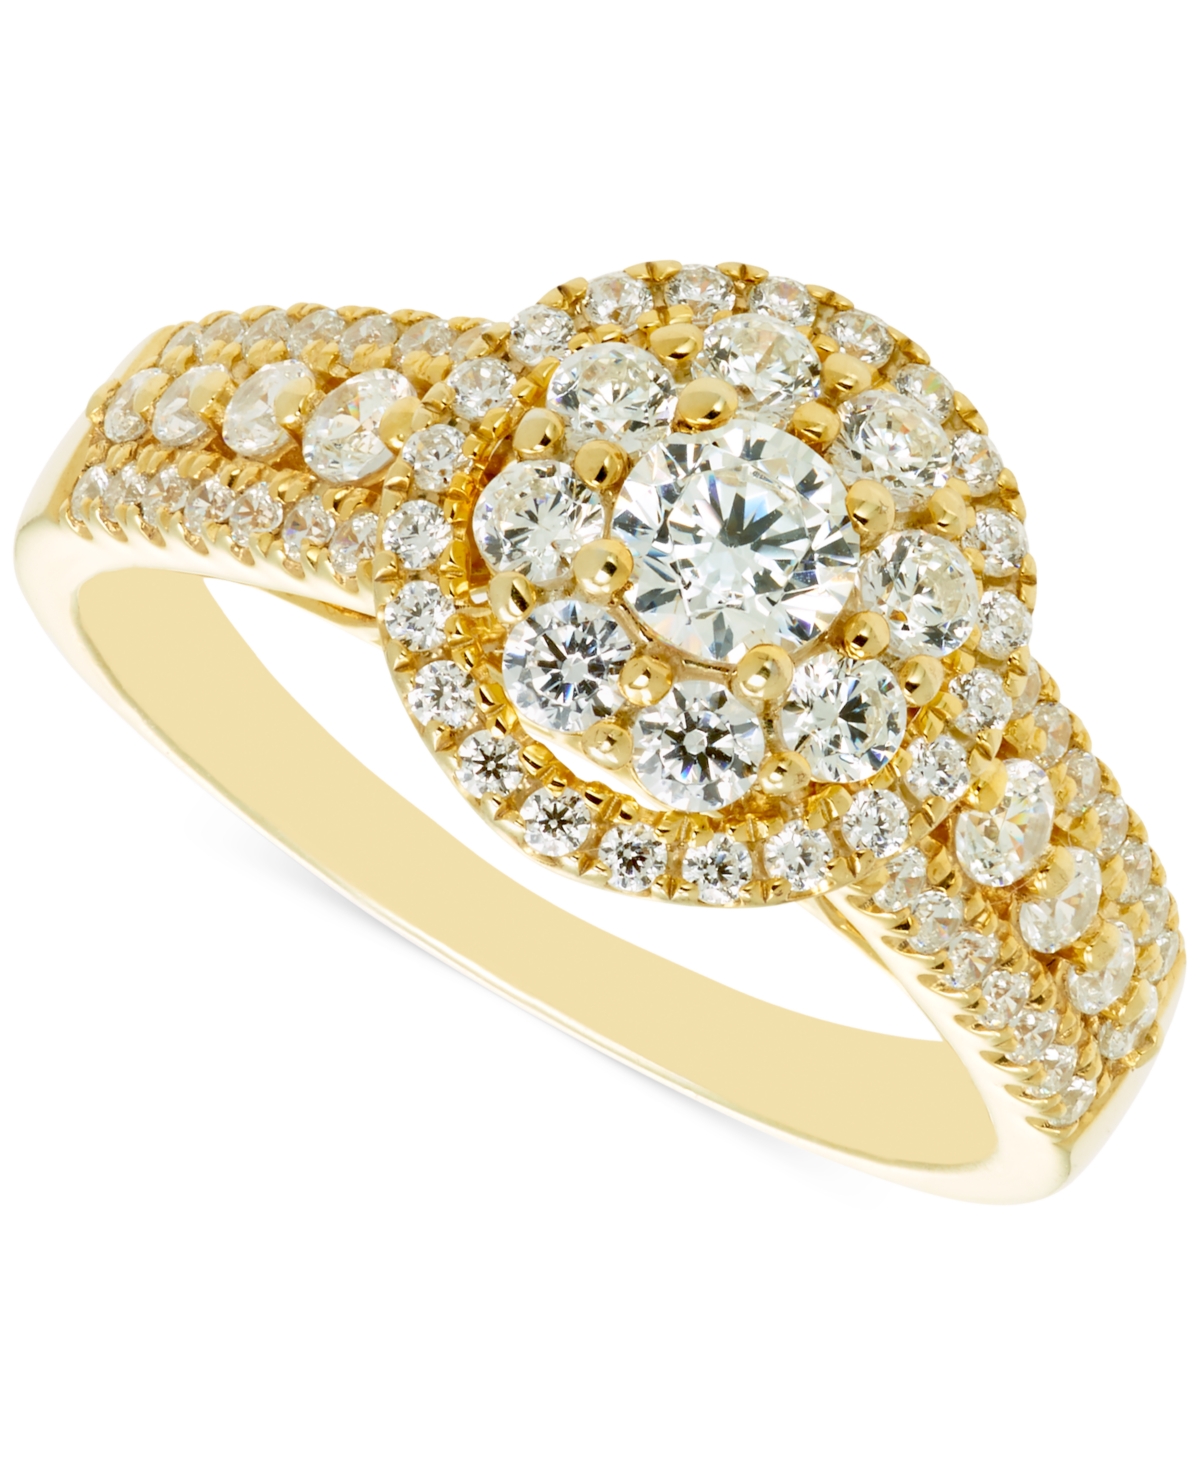 Diamond Double Halo Engagement Ring (1 ct. t.w.) in 14k Gold - Yellow Gold